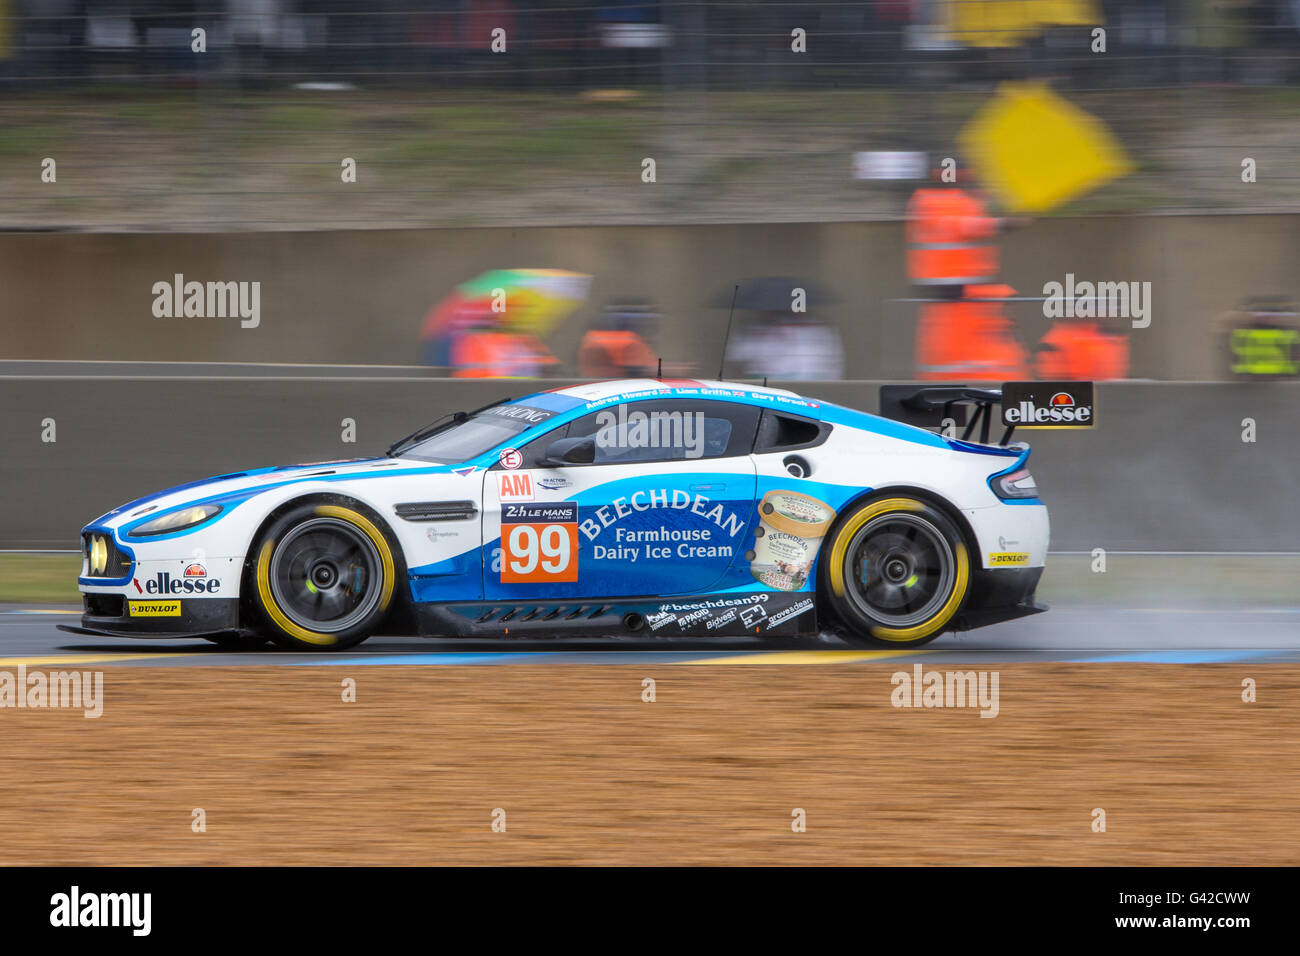 Le Mans Circuit, Le Mans, France. 18th June, 2016. Le Mans 24 Hours Race.  Aston Martin Racing Aston Martin Vantage GTE LMGTE Am driven by Andrew  Howard, Liam Griffin and Gary Hirsch.